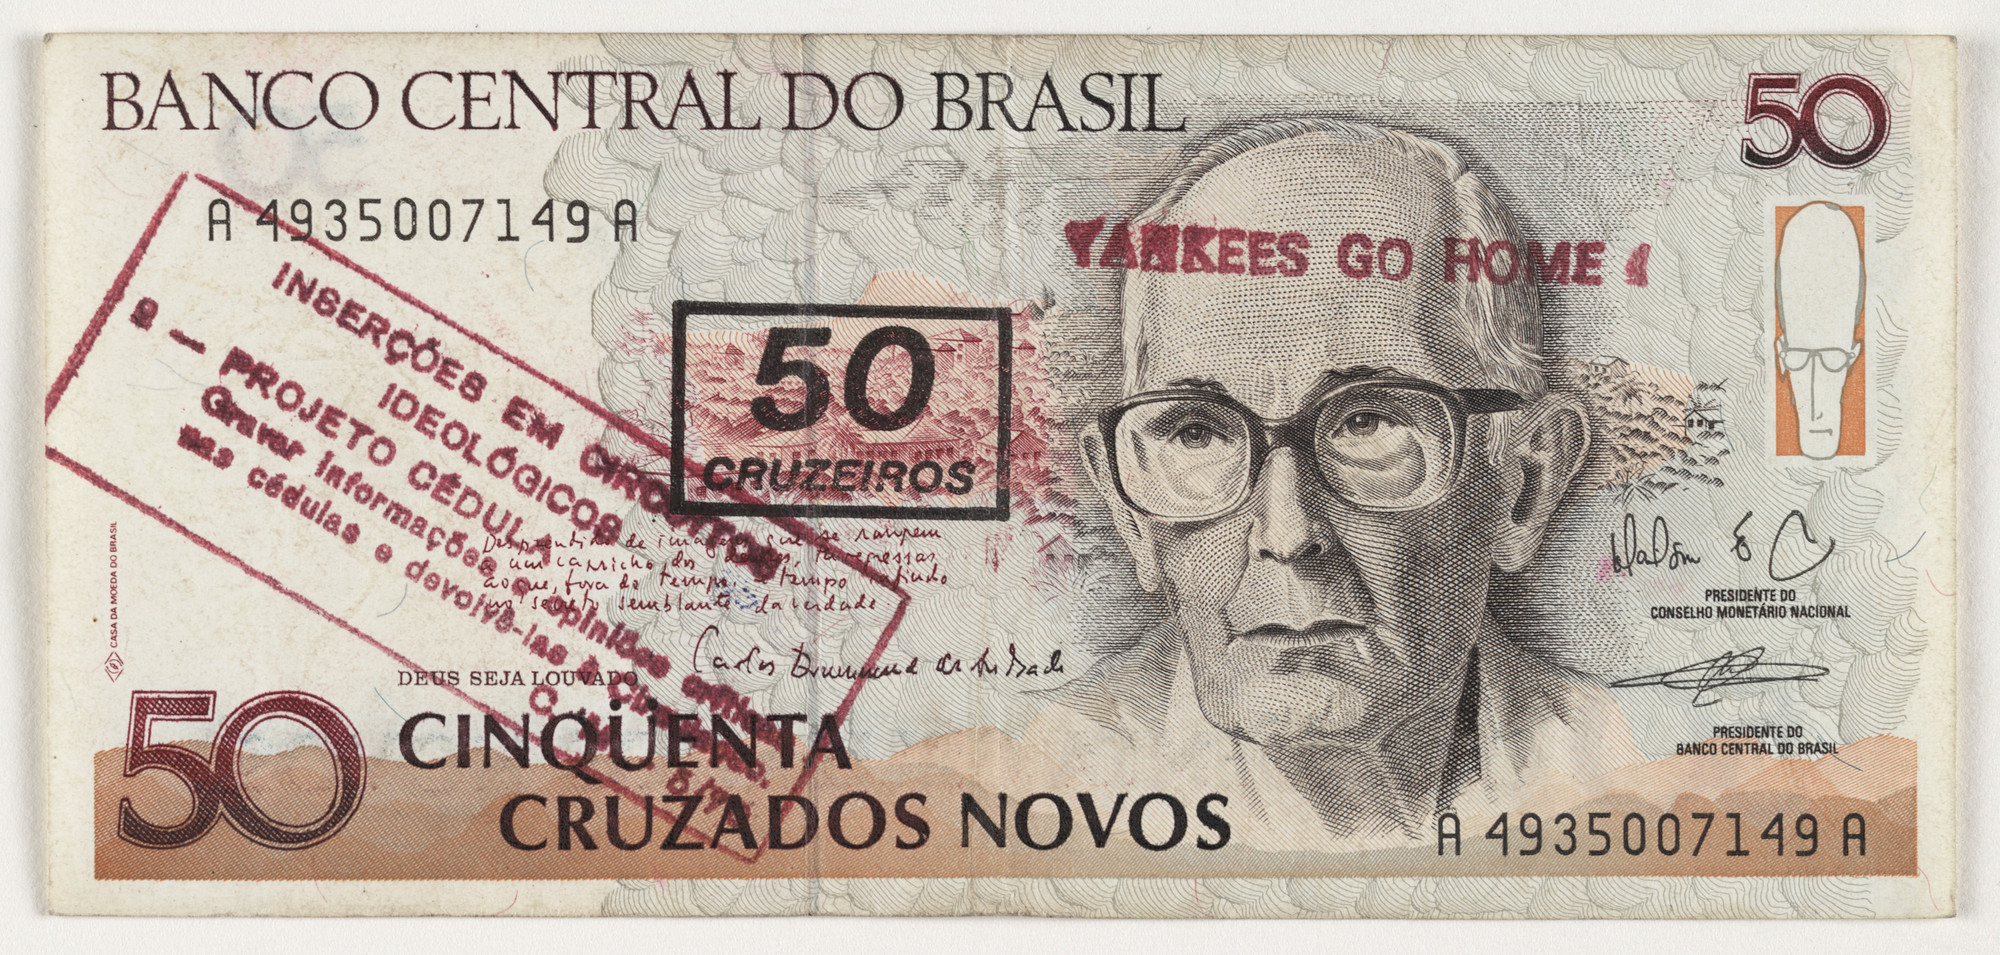 <p>“Cedulla/Currency Project: Insertions into Ideological Circuits” Cildo Meireles, 1970</p>